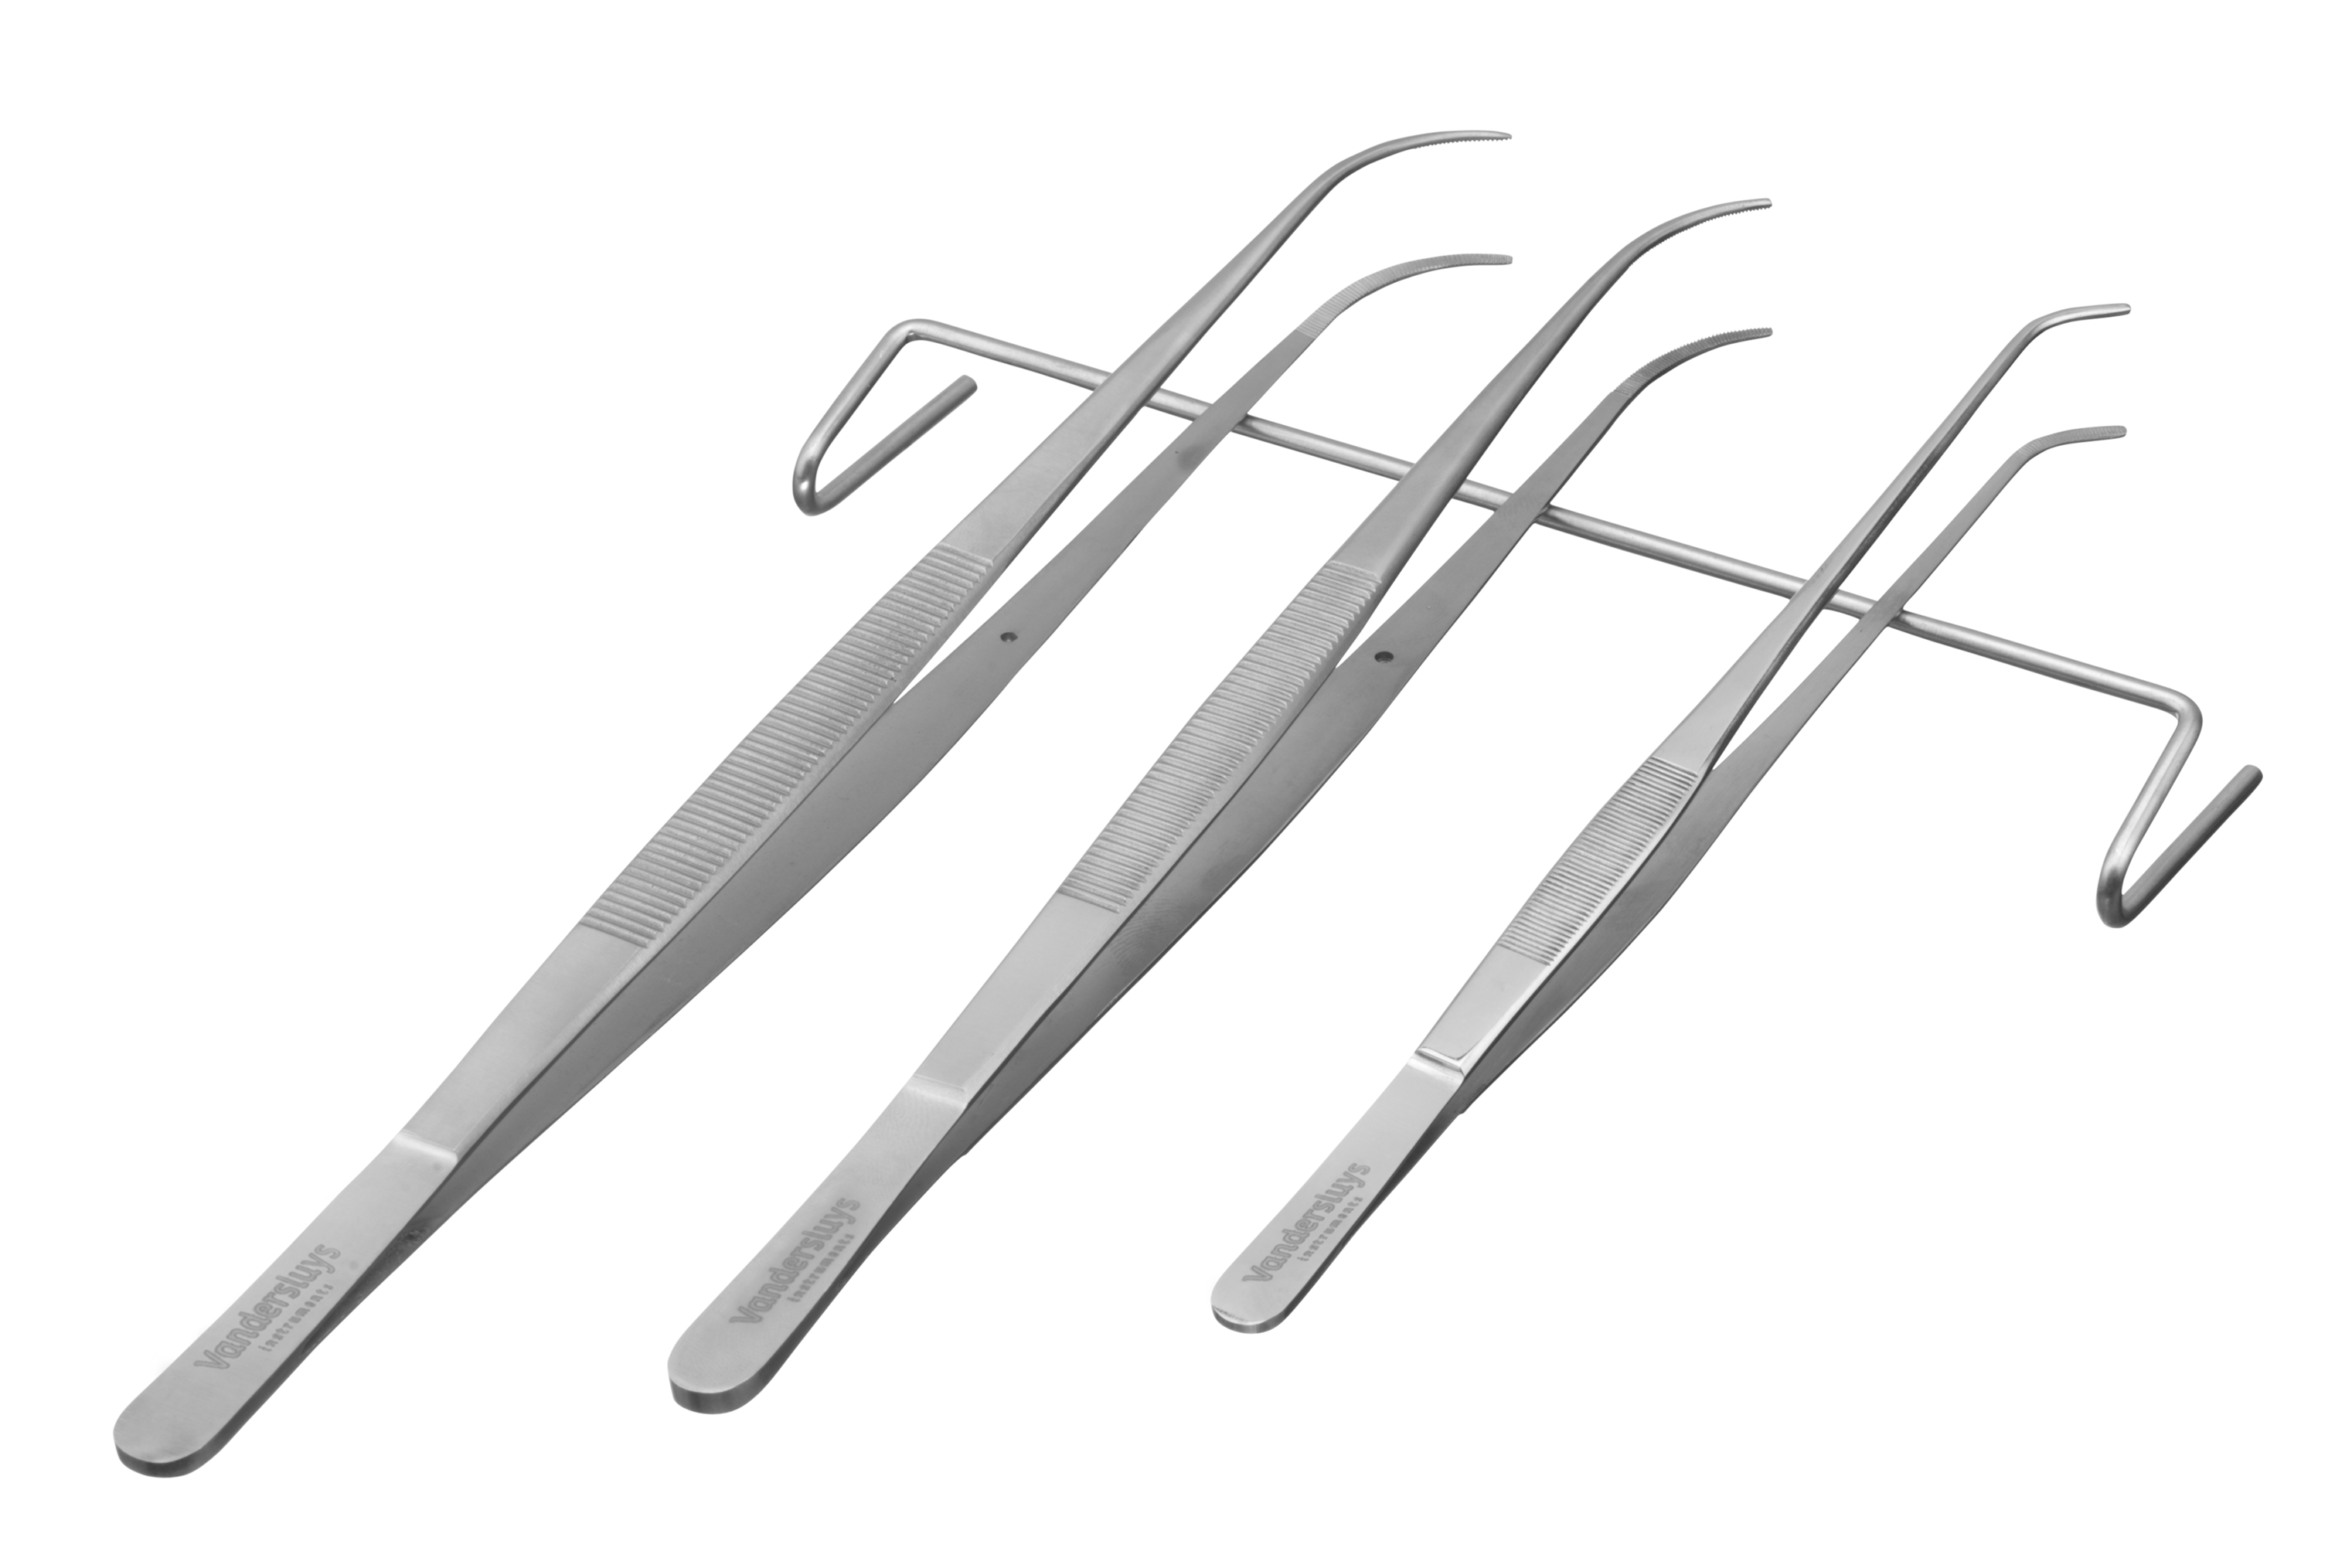  Curved tip forceps for PTC